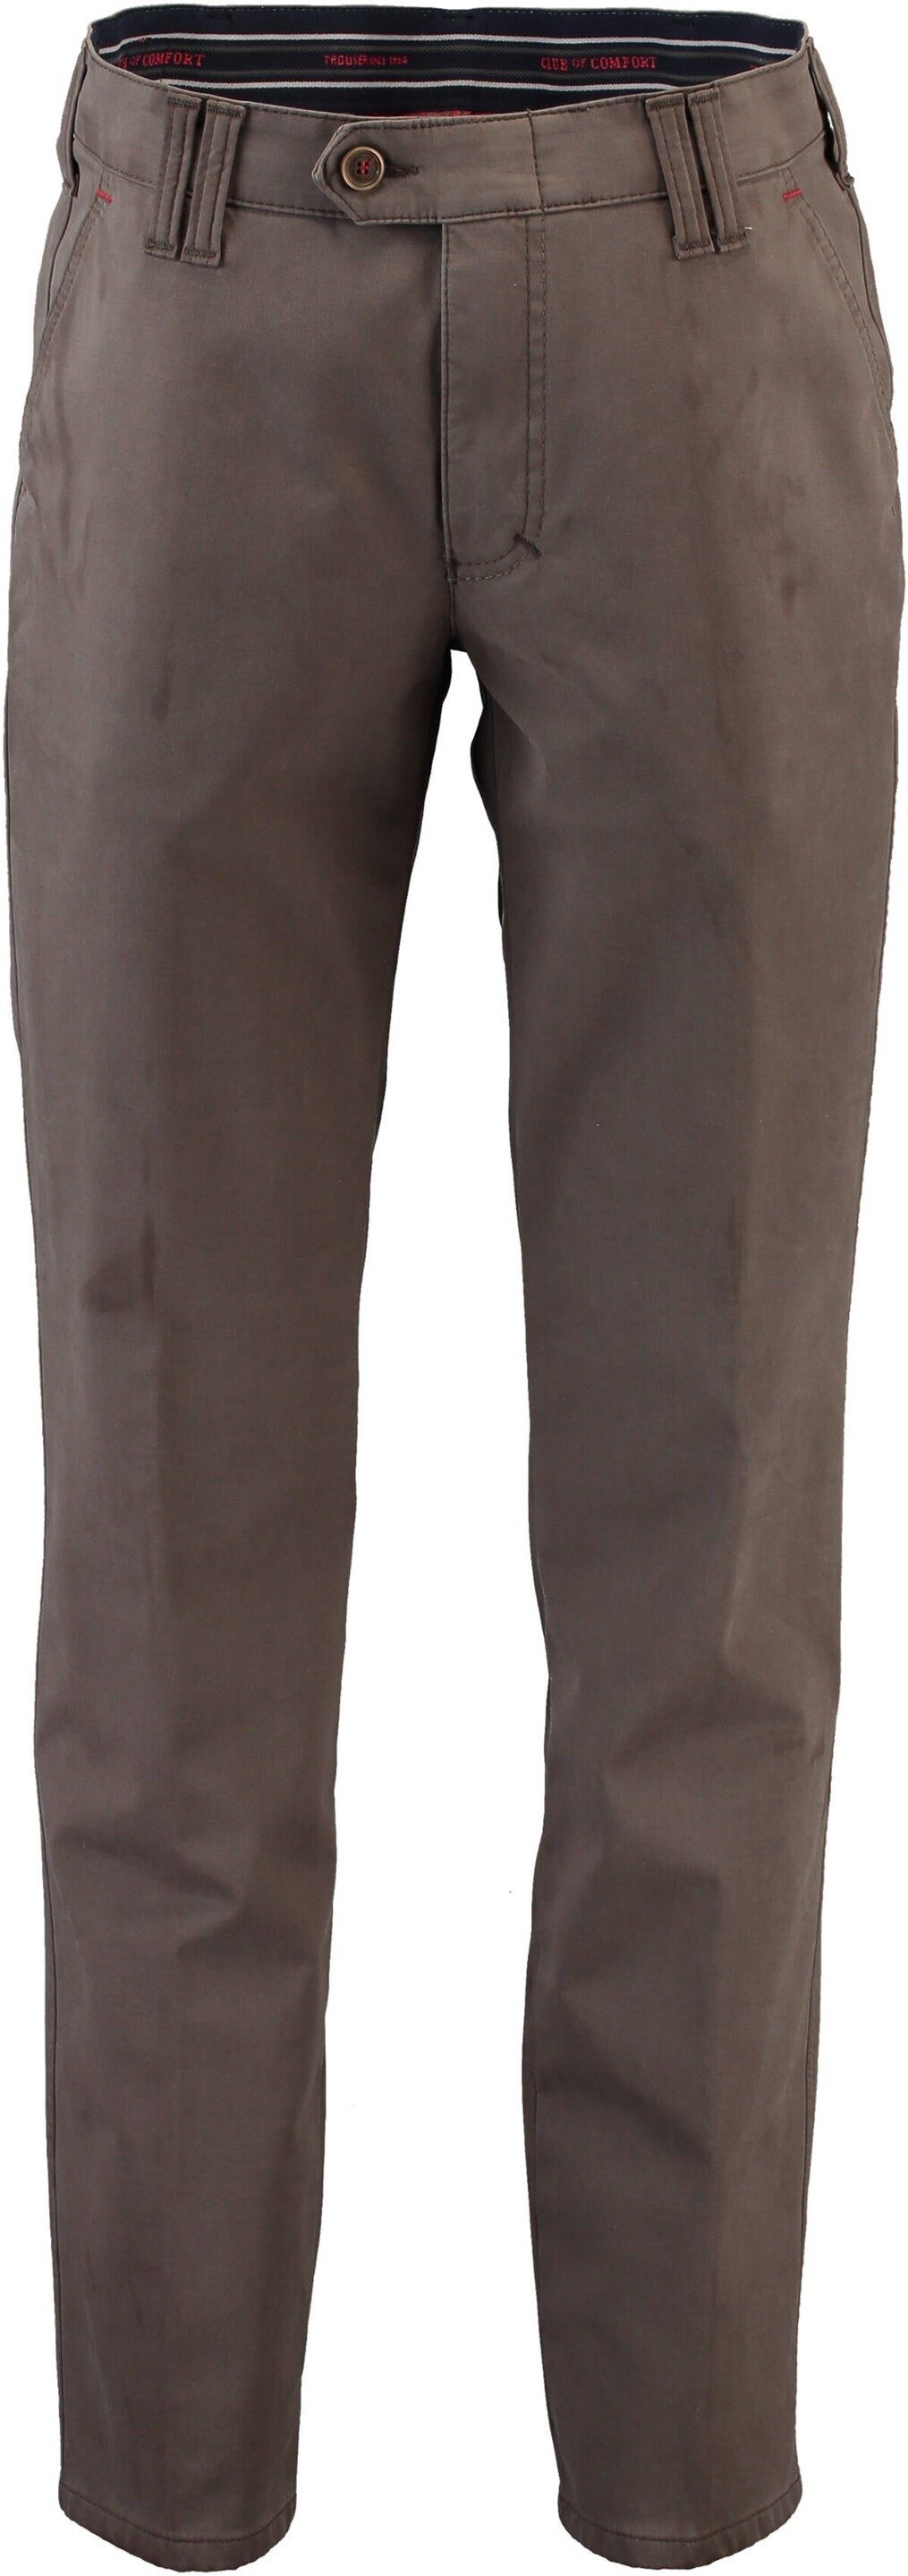 Club Thermohose Comfort schlamm of